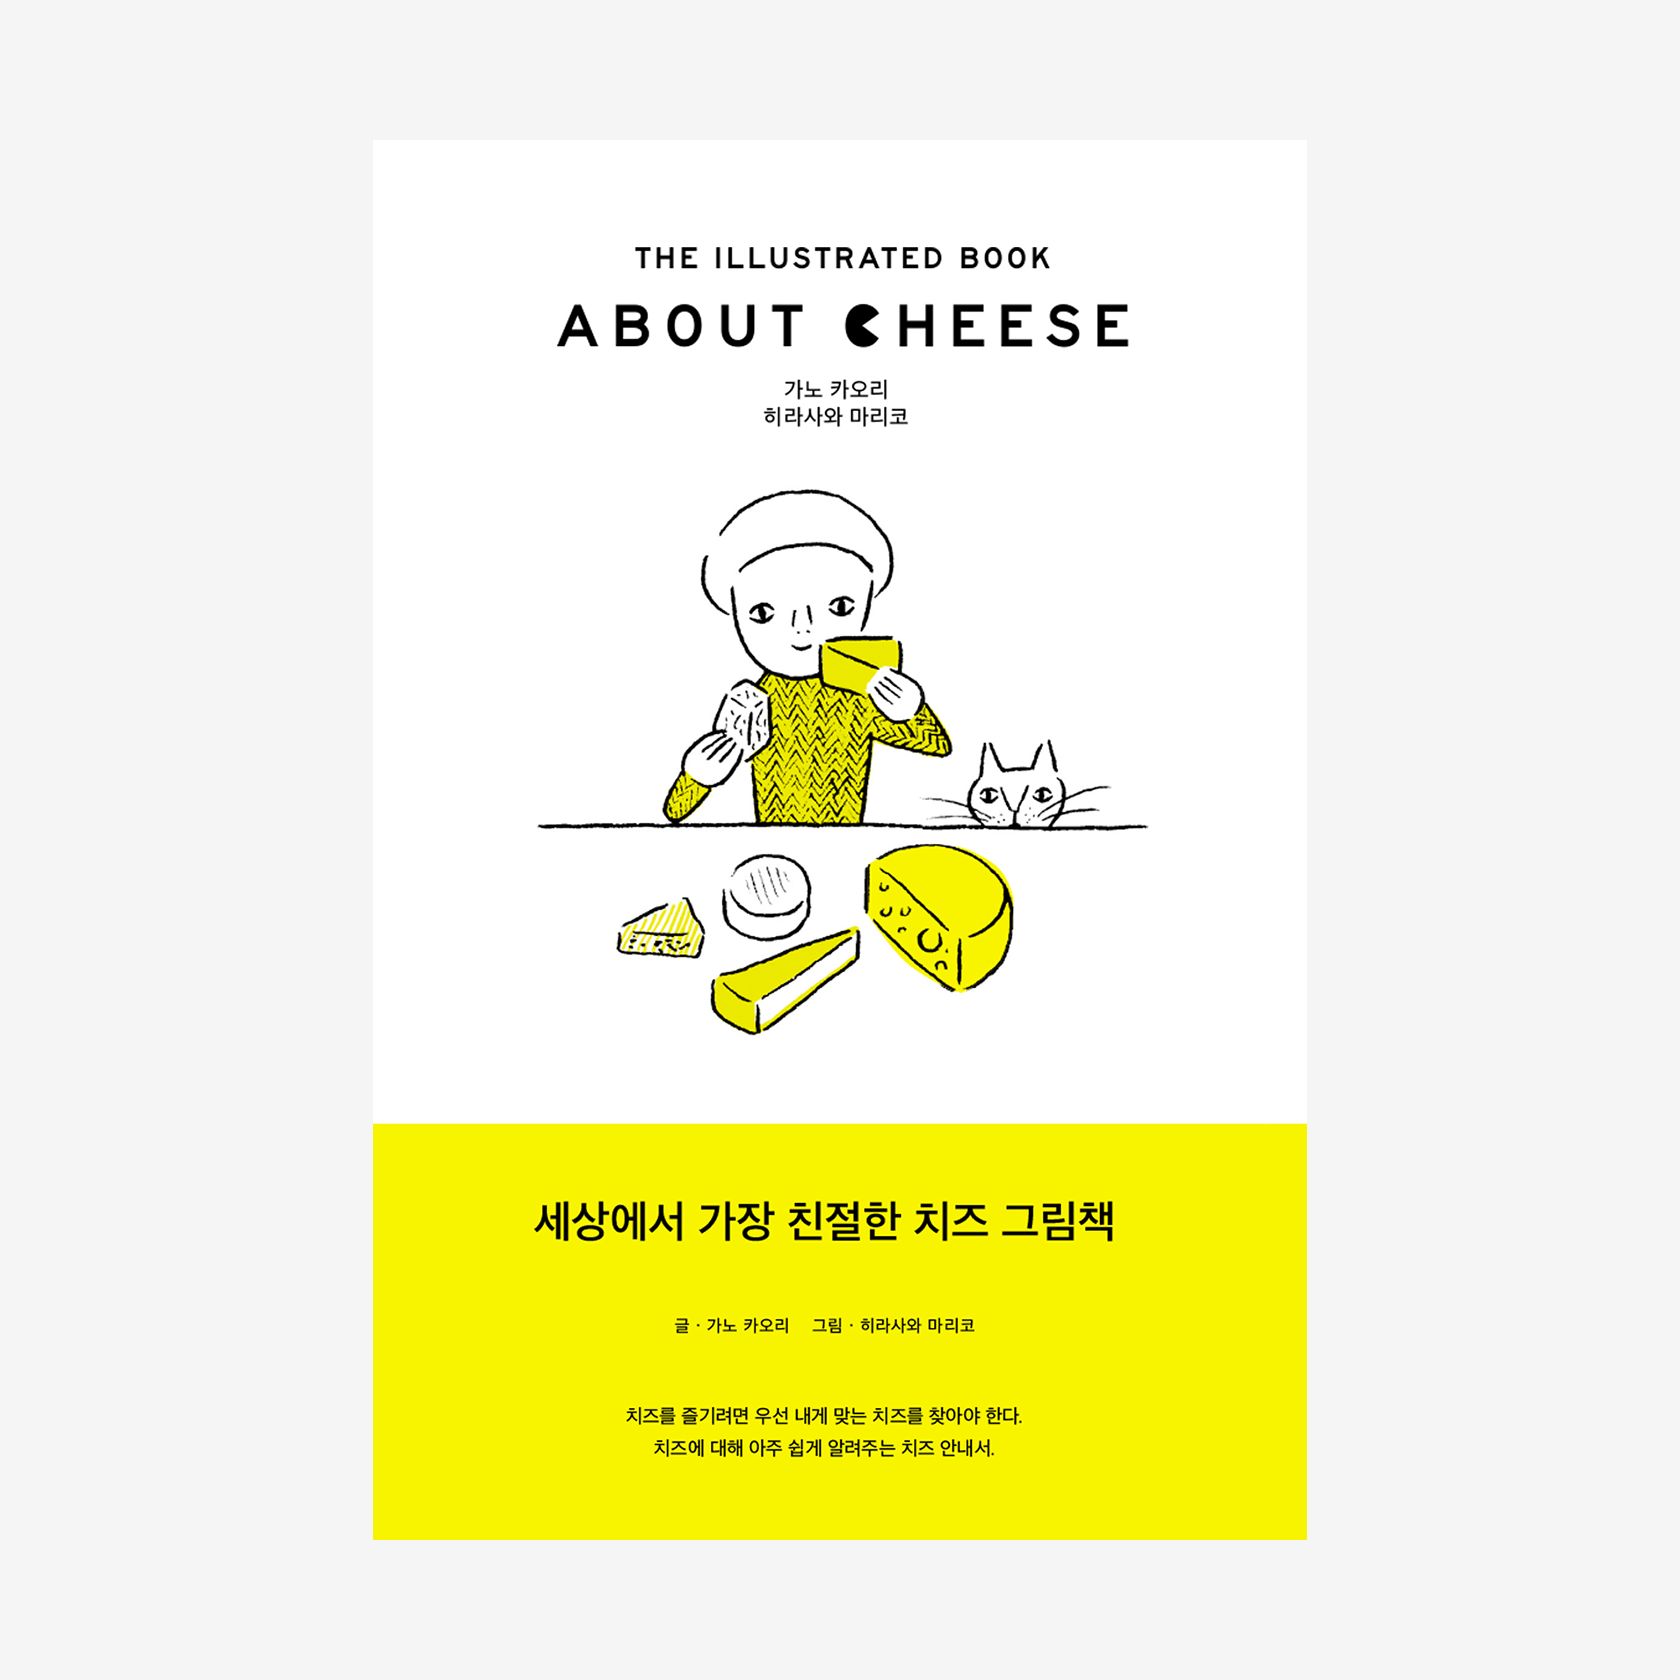 About cheese